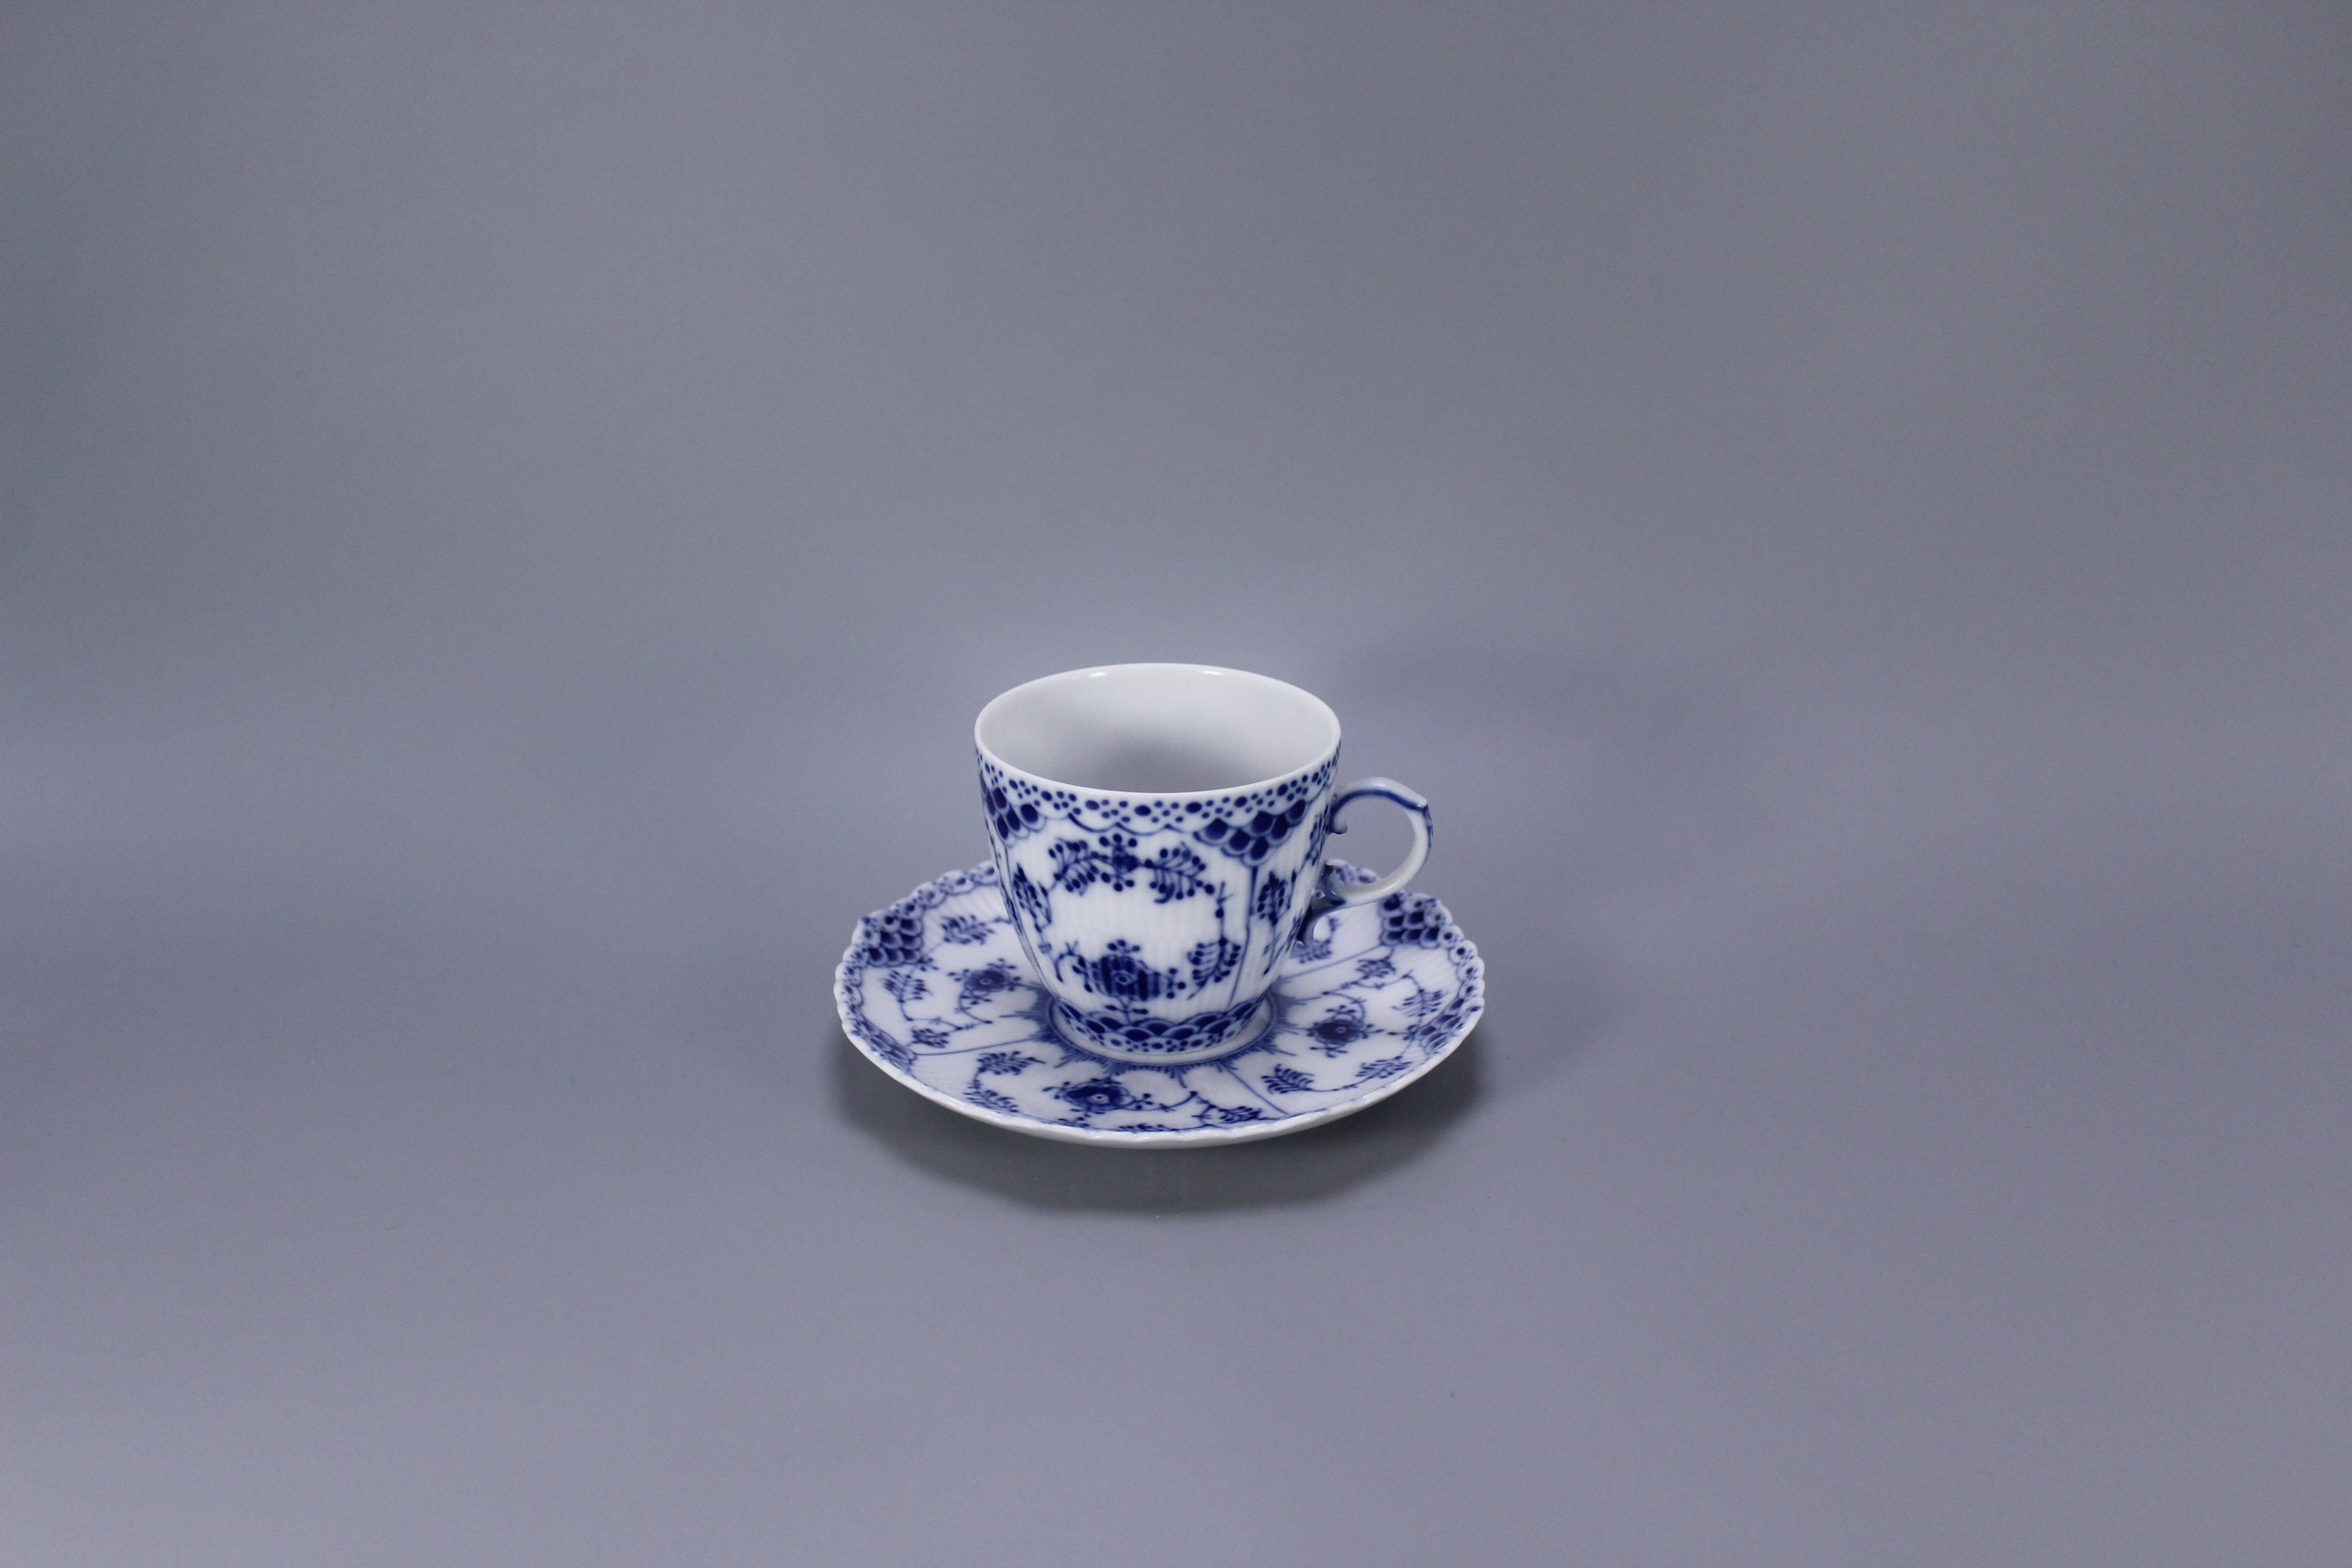 Porcelain Coffee Cup and Saucer Excellent Condition Royal Copenhagen First Quality Blue Fluted Full Lace # 1035